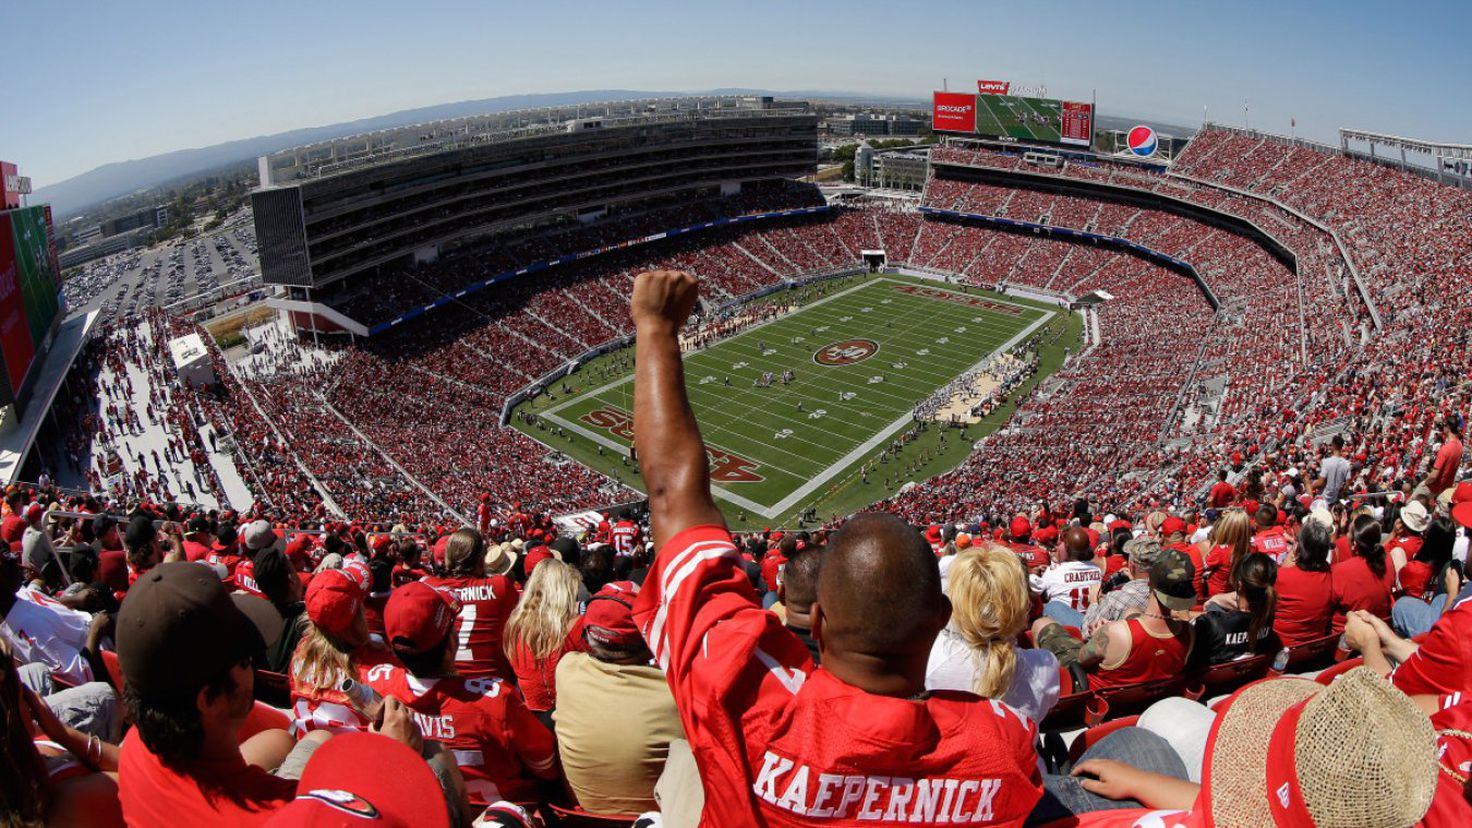 Official: Super Bowl LX will be held at Levi's Stadium home of the 49ers in 2026
